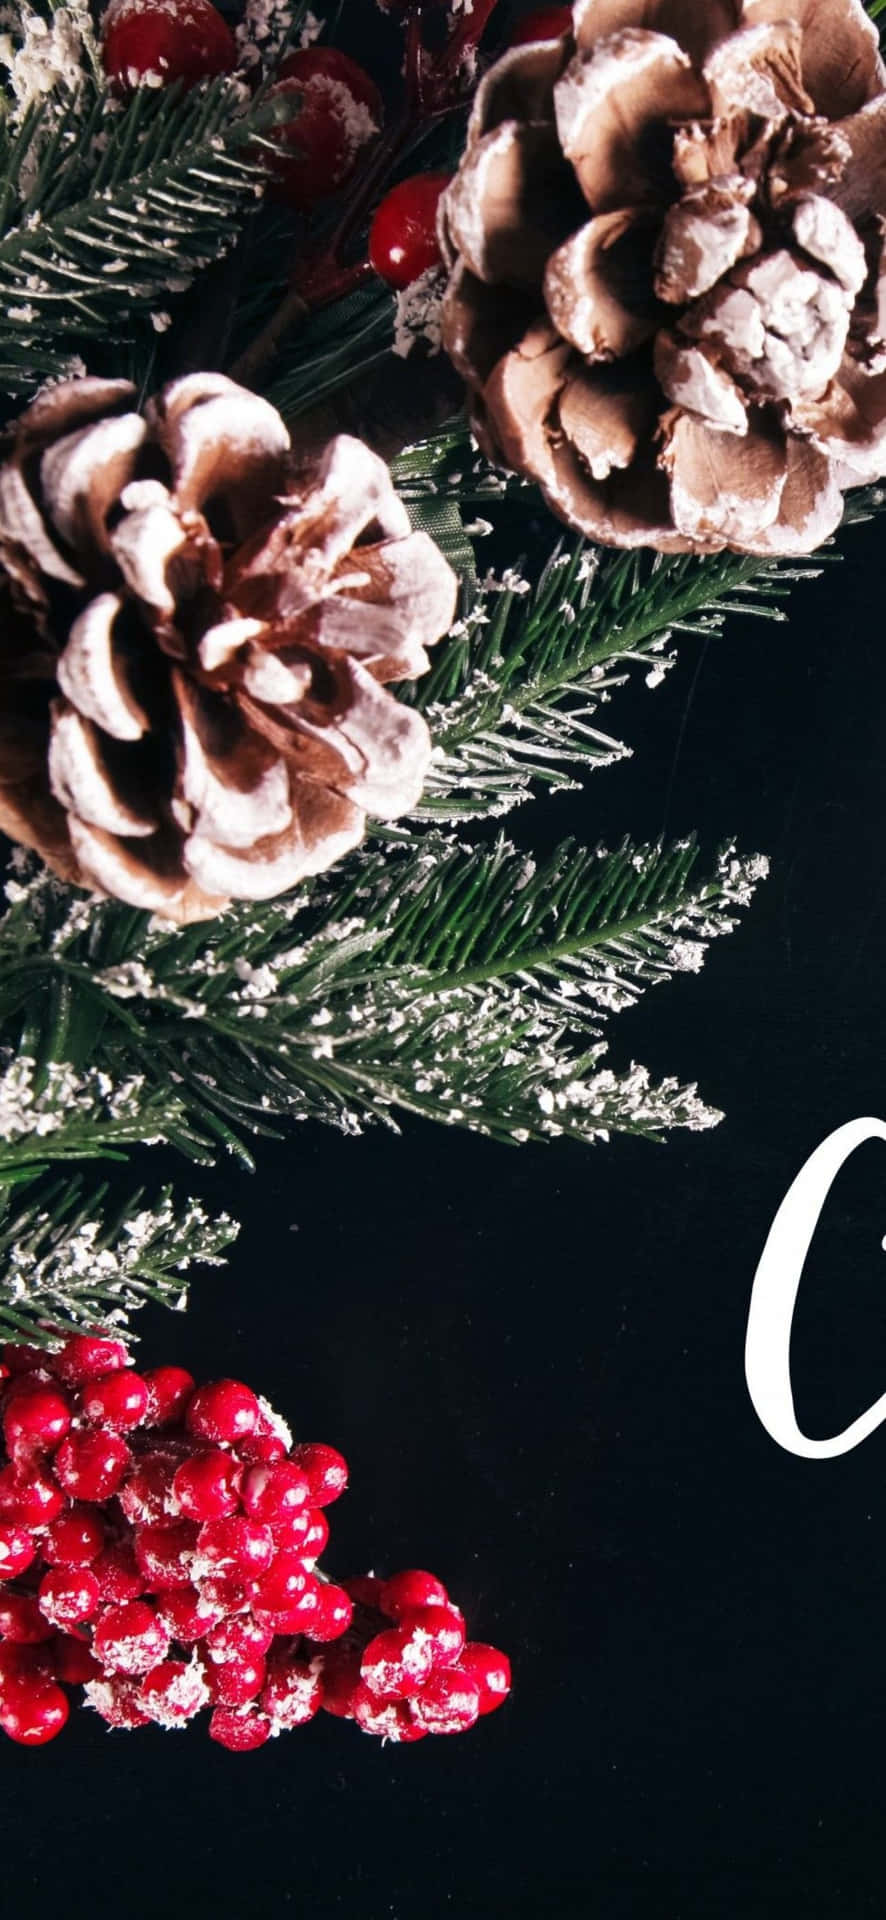 Celebrate the festive season with this charming Christmas themed iPhone background